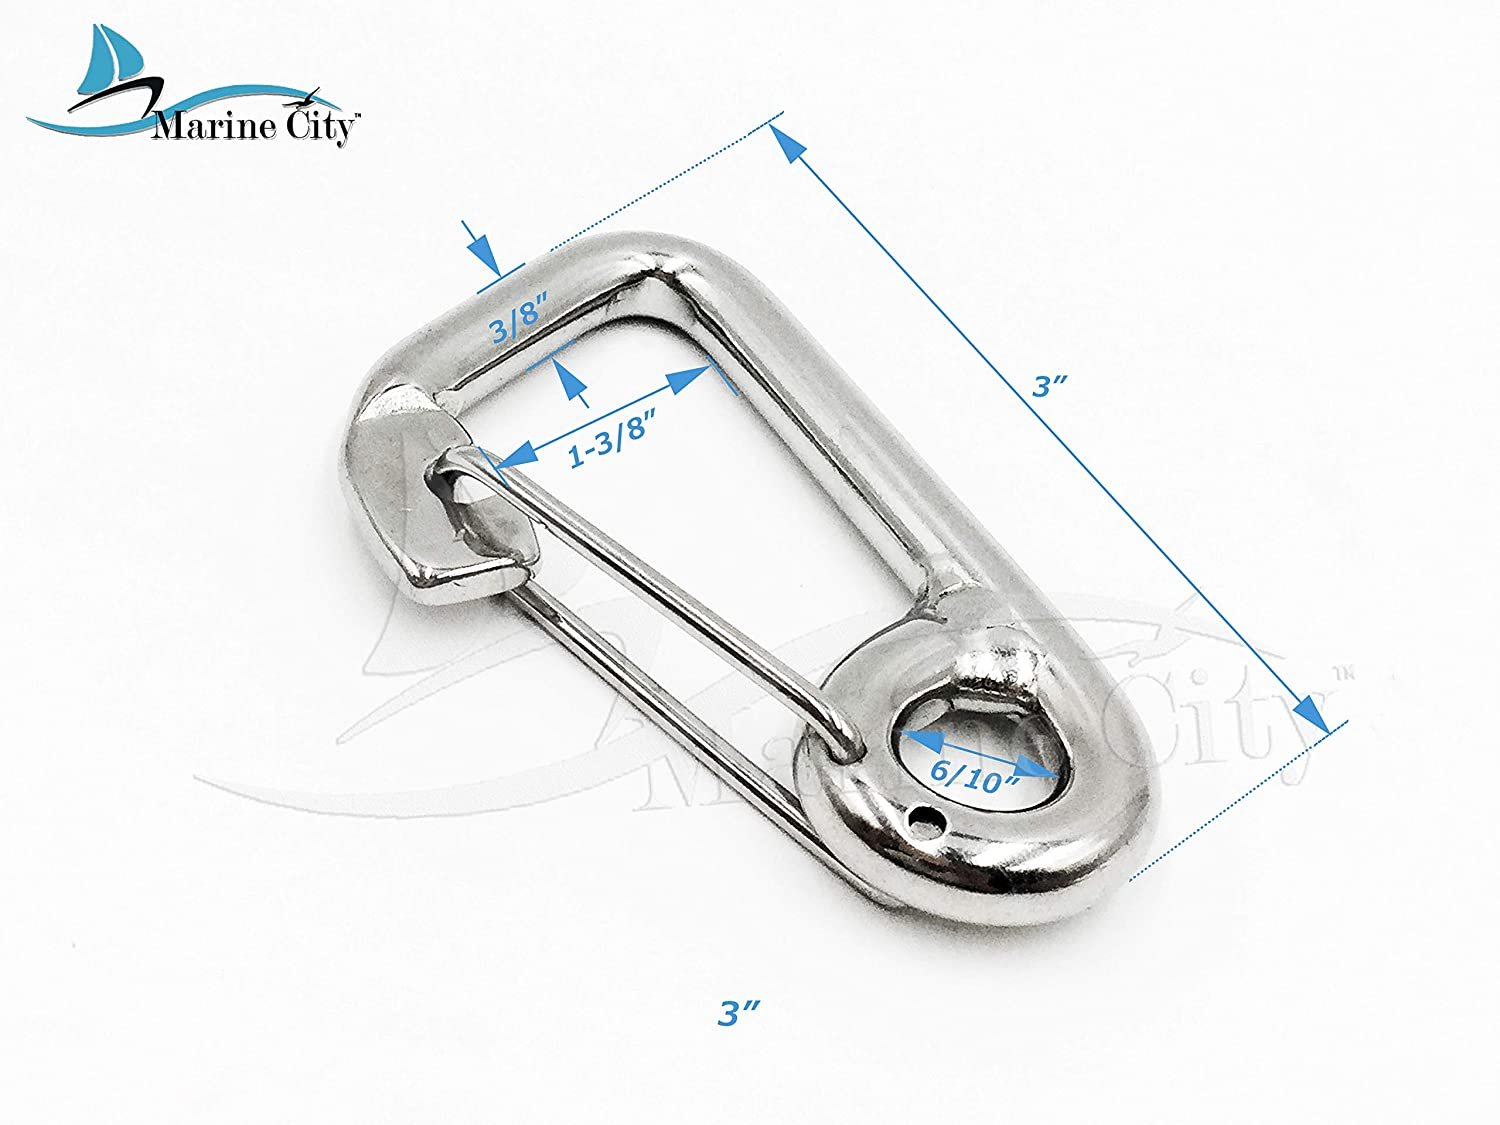 Marine City 316 Marine Grade Stainless Steel Carabiner Spring Snap Hook Boat C:2-3/8 inches - image 3 of 9